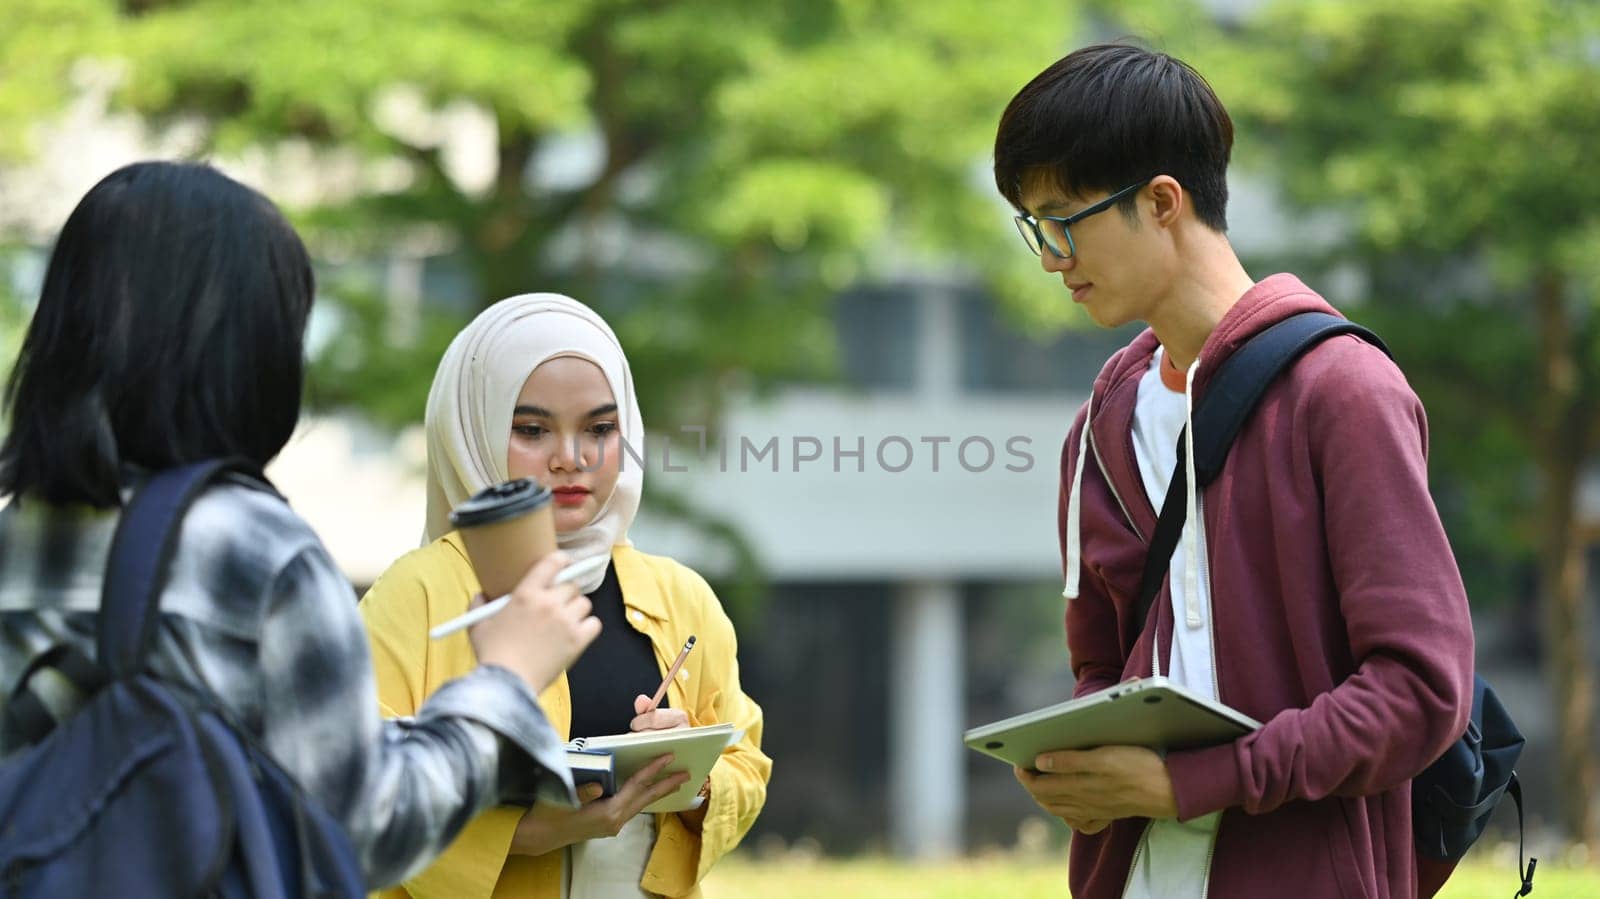 Group of students talking to each other after classes while walking in university outdoors. Youth lifestyle and community by prathanchorruangsak